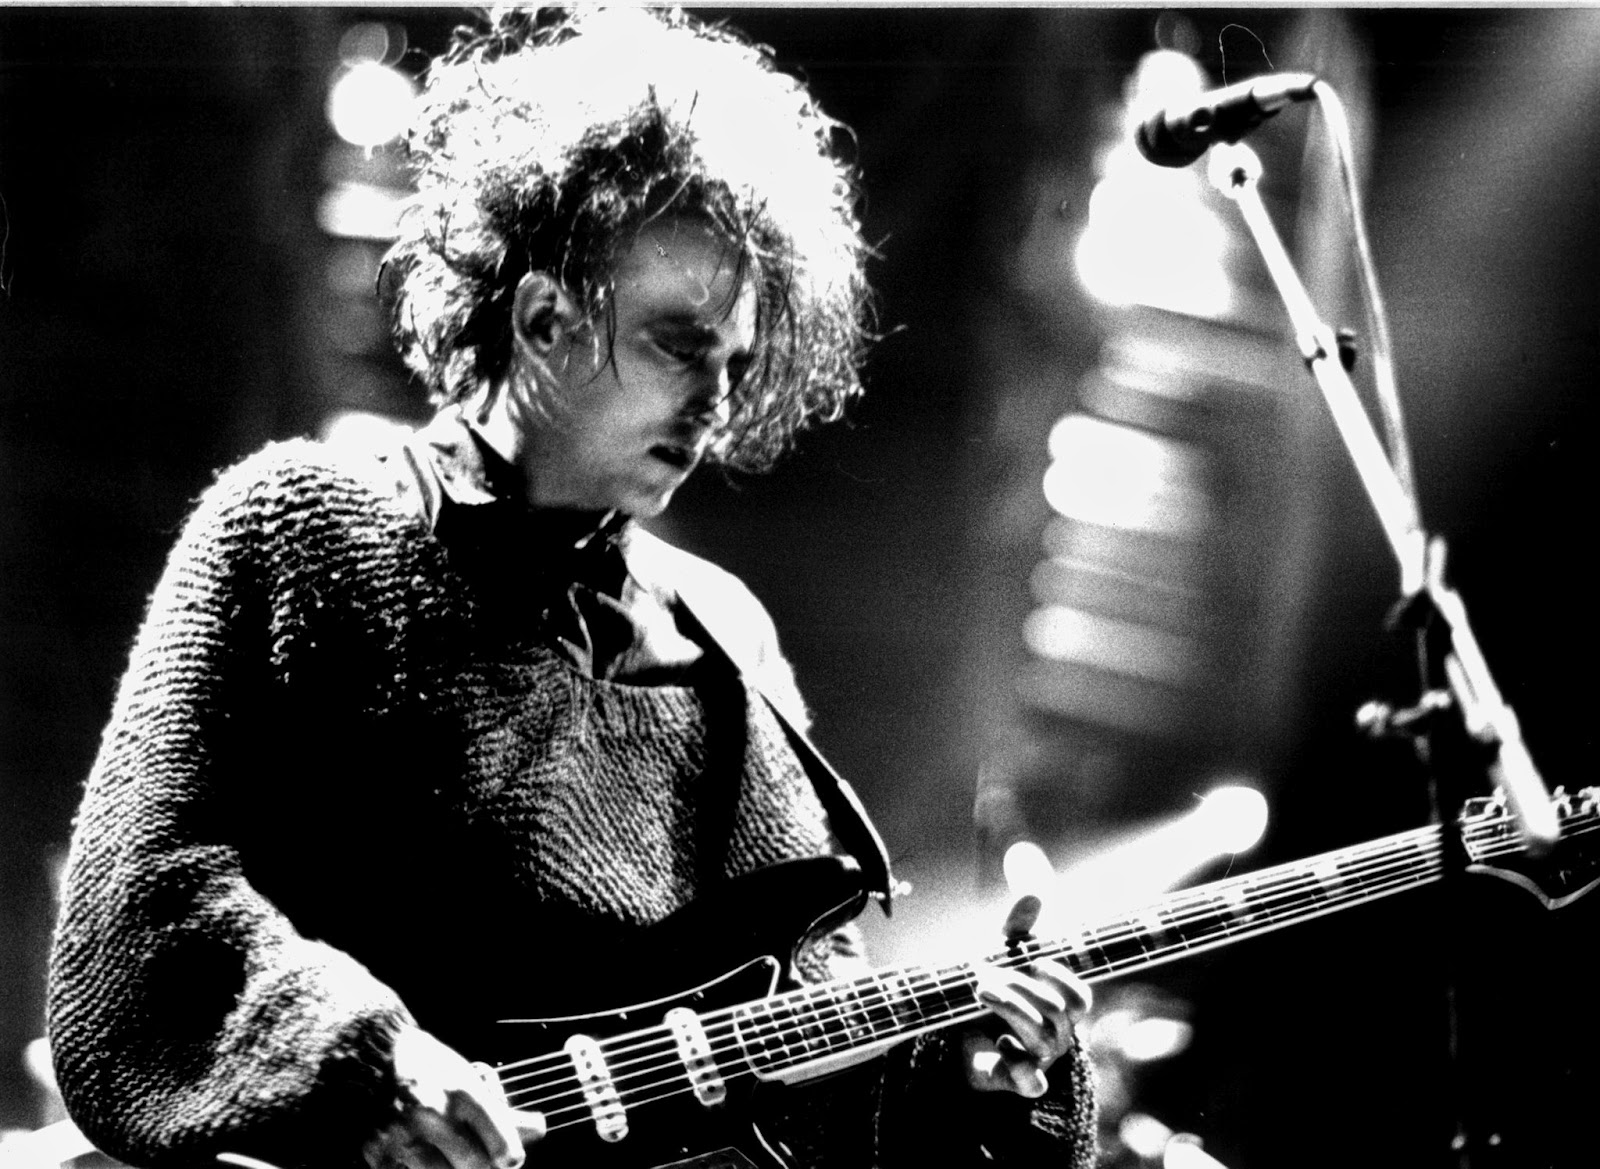 Break Up Songs: Pictures Of You http://www.jinglejanglejungle.net/2015/02/pictures-of-you.html #BreakUpSongs #TheCure